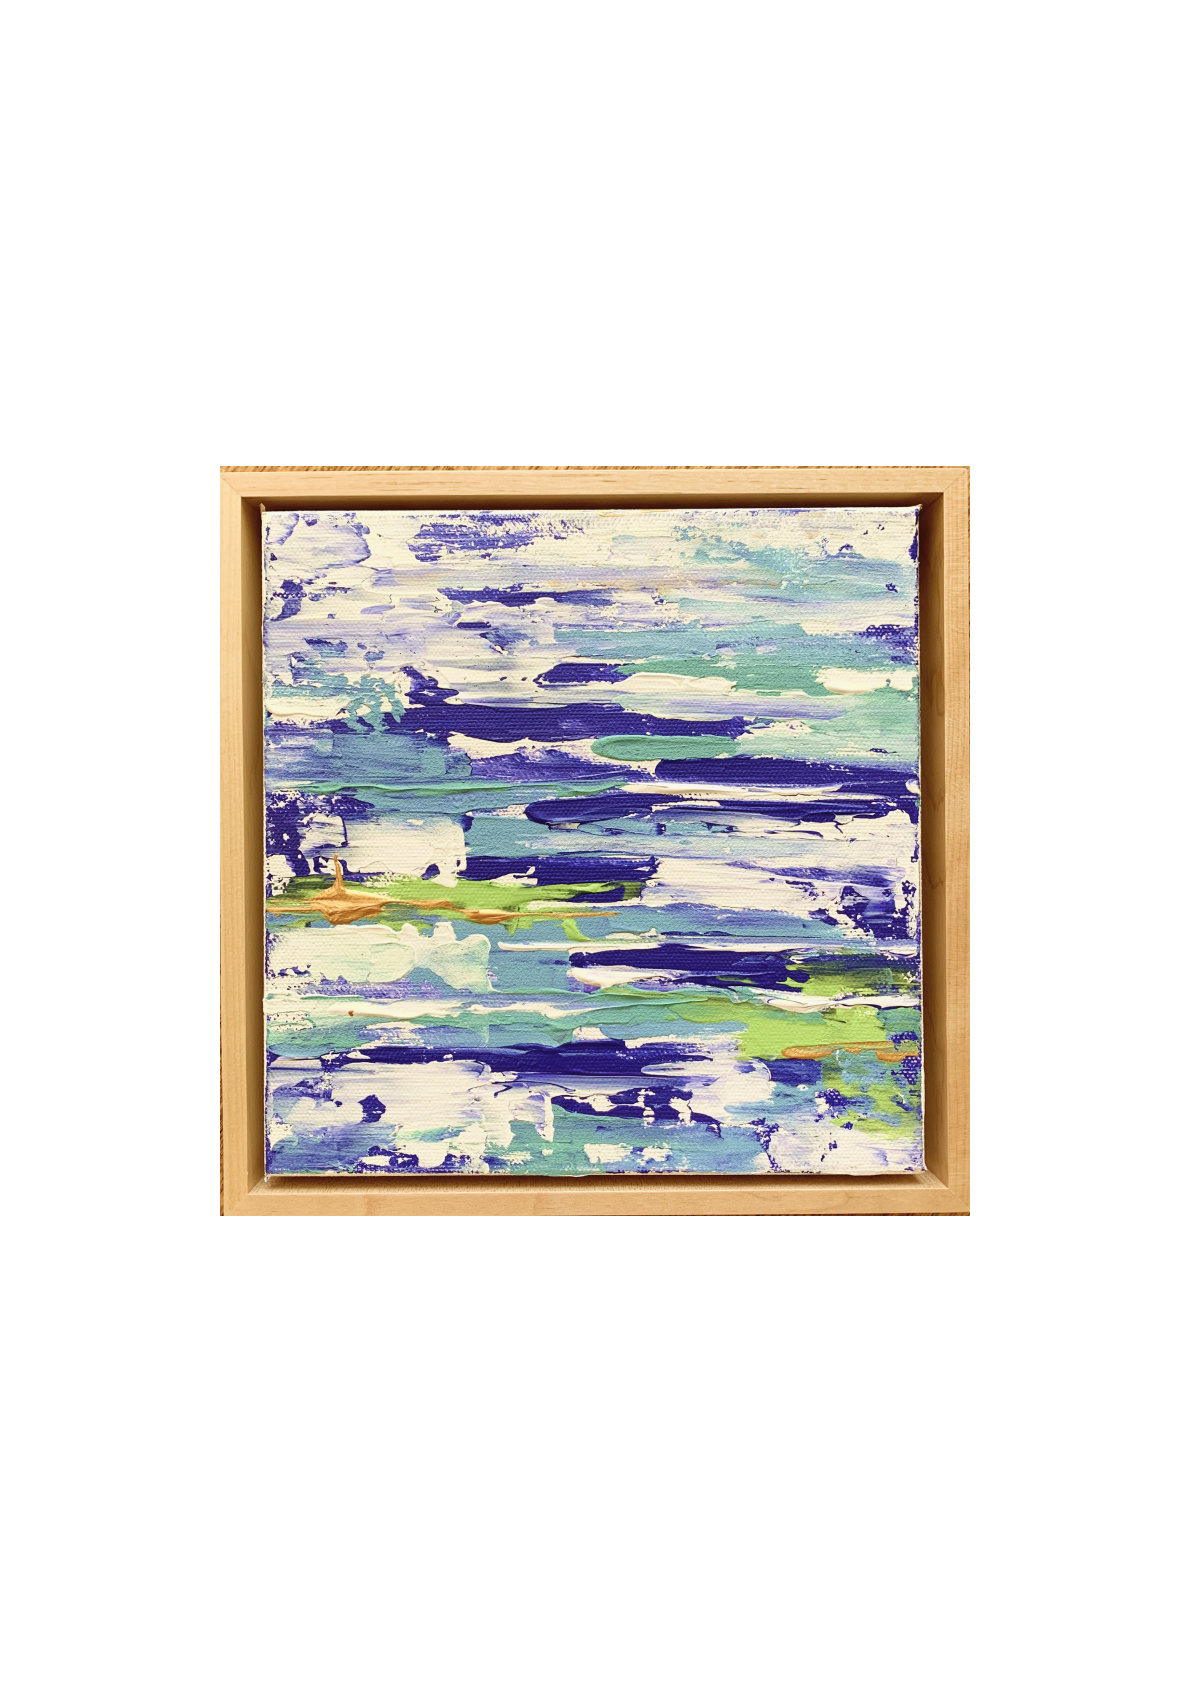 Magnuson Framed Abstract Art Painting by Ariane Callender